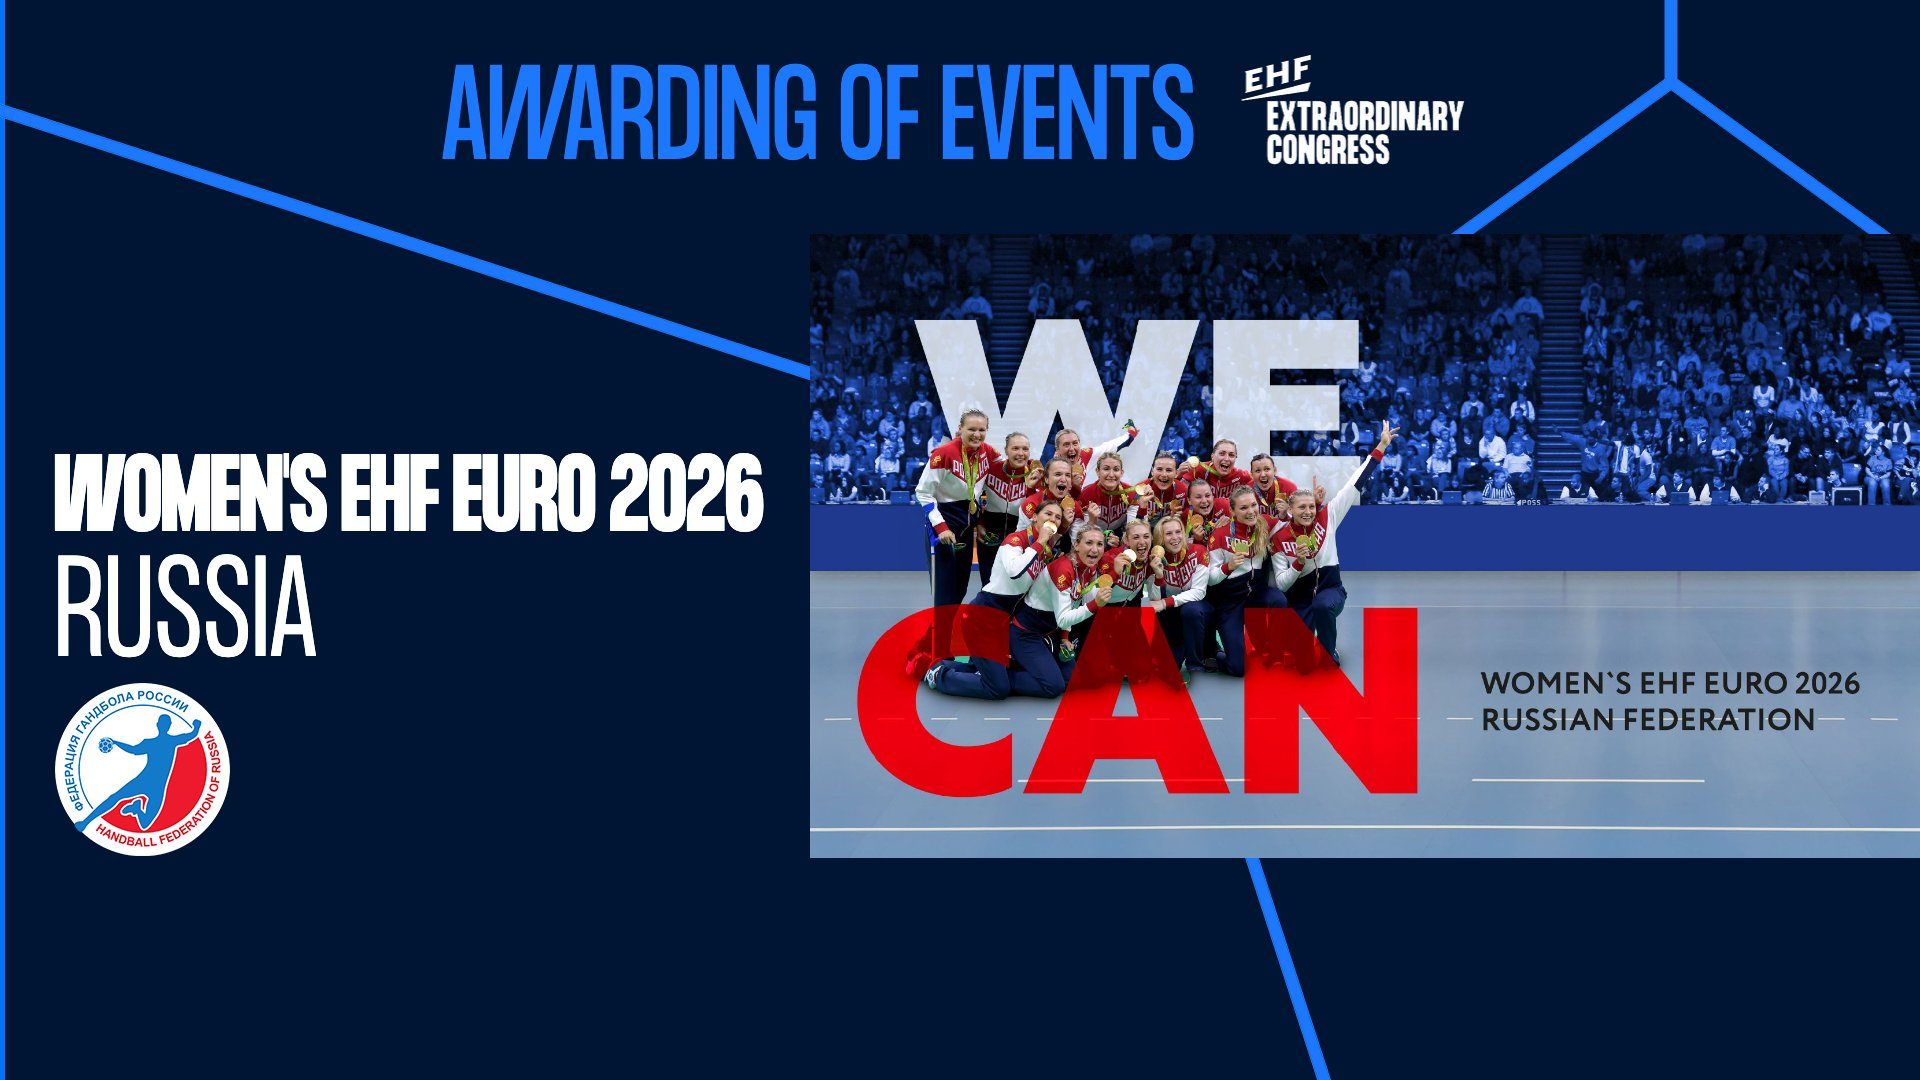 Russia was awarded the 2026 European Women's Handball Championships by the EHF in November 2021 ©EHF